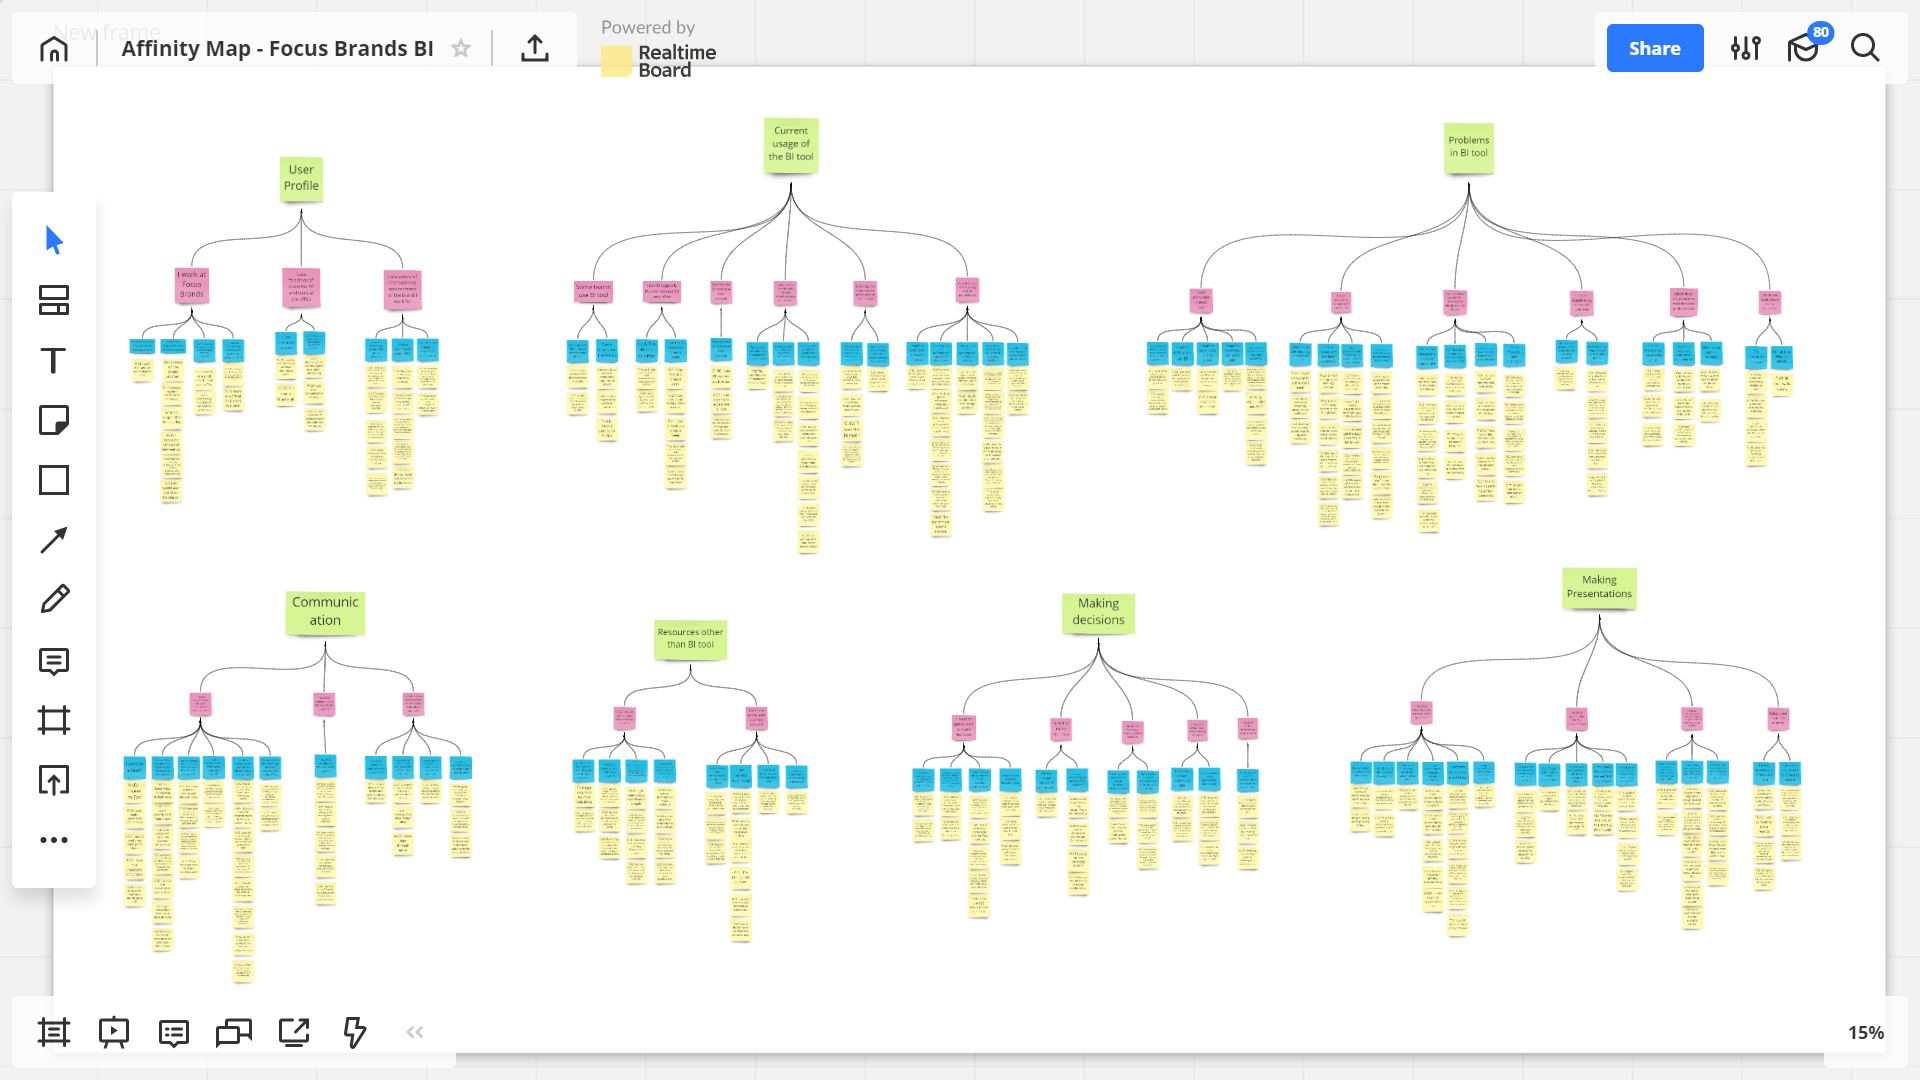 A screenshot of the affinity map we created to analyze the data we collected.